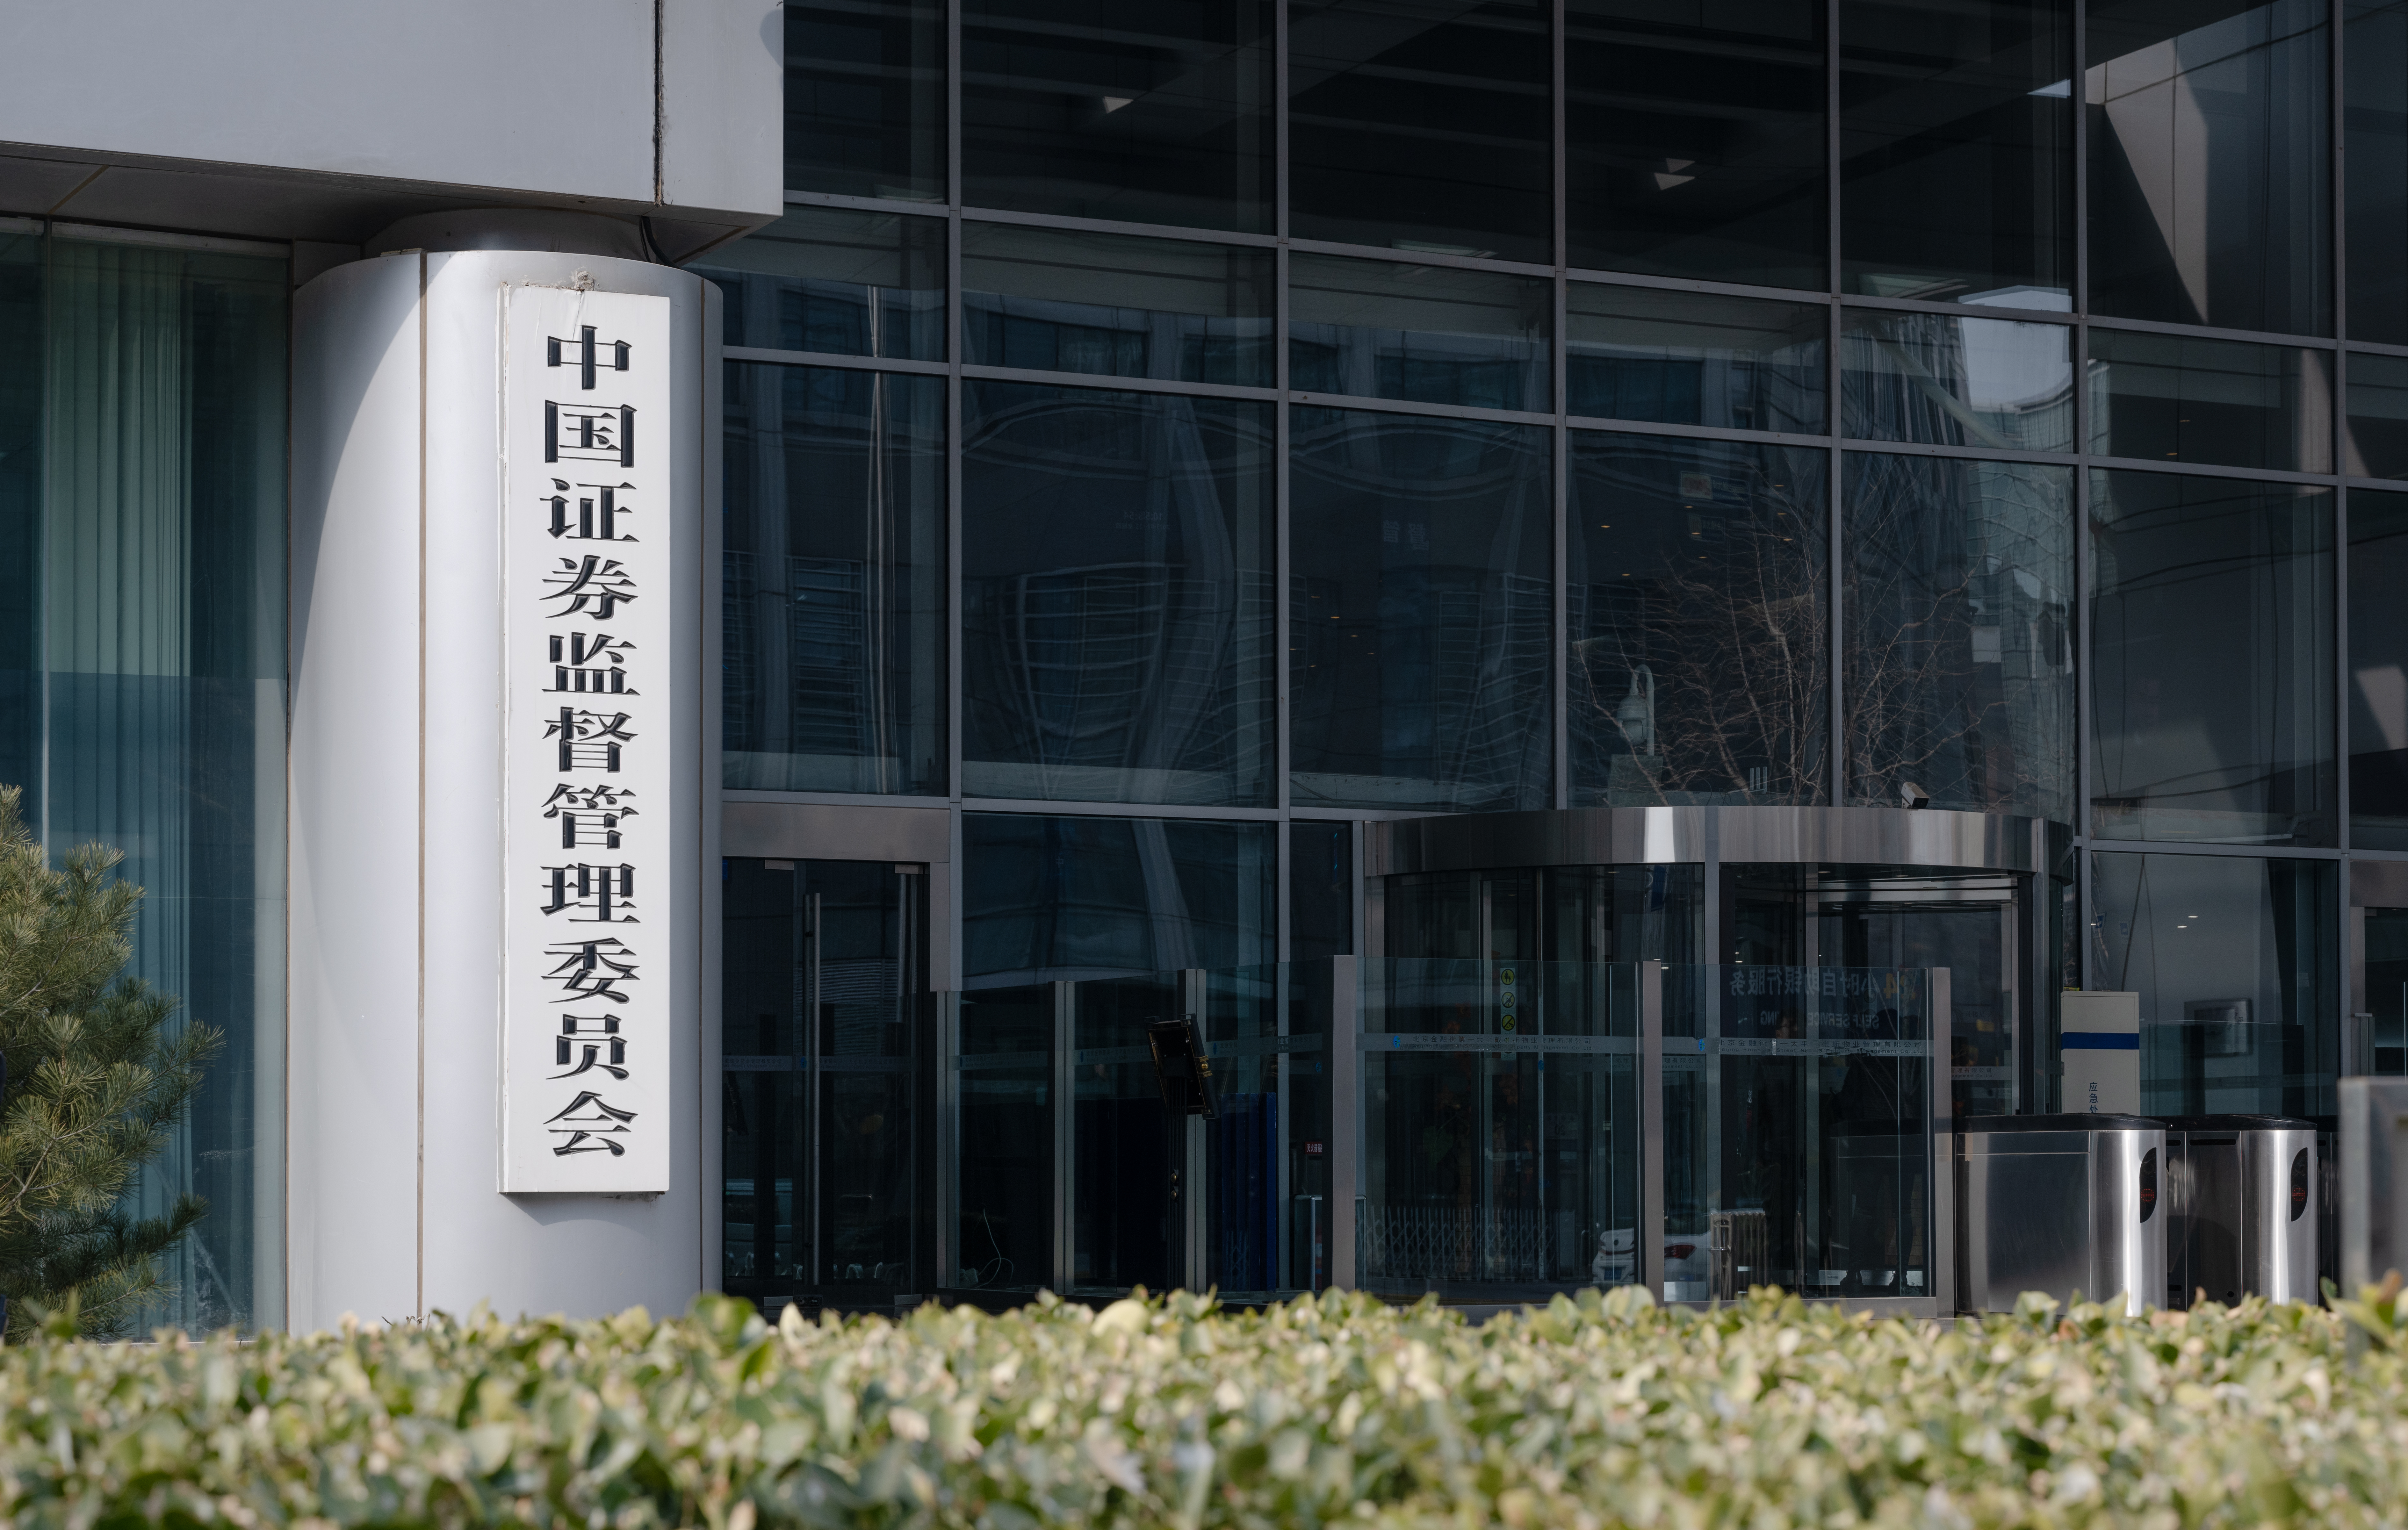 The China Securities Regulatory Commission said in a notice on Thursday that Cheche Technology had filed the required registration materials to issue shares and list on the Nasdaq. Photo: VCG